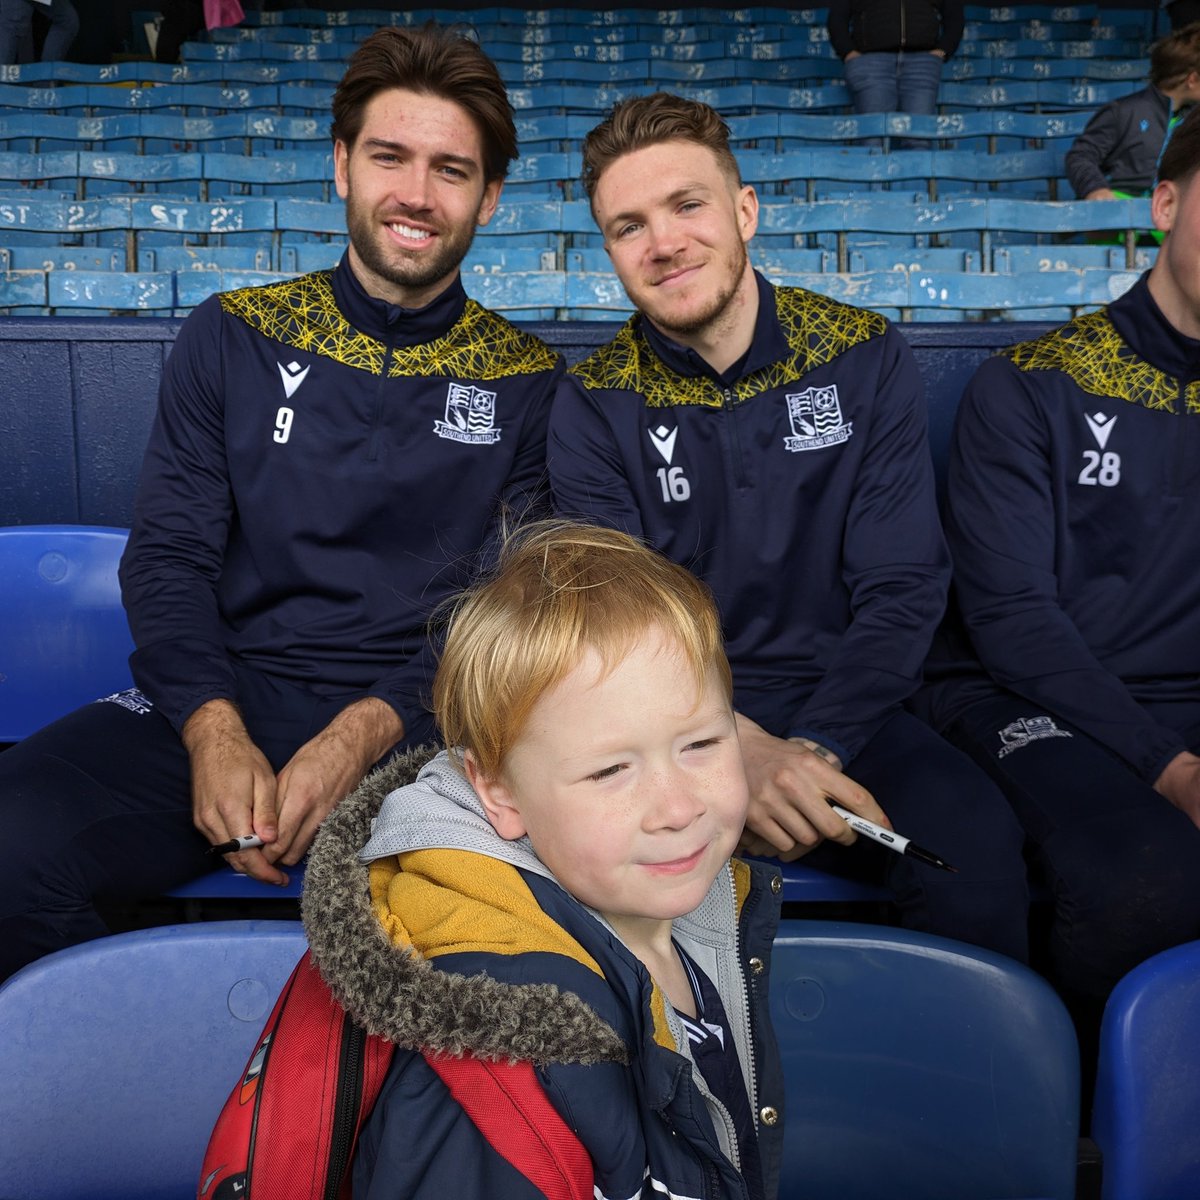 @SUFCRootsHall Open Training Day Harry's really happy to get pics of the 3 Harry's (although he was distracted 🫣) and to be sat in the management again with King Kev, @rubycurrie and @benno_1978 - thanks for remembering him! Thanks all involved @JuniorBlues2 @shrimperstrust 💙🦐